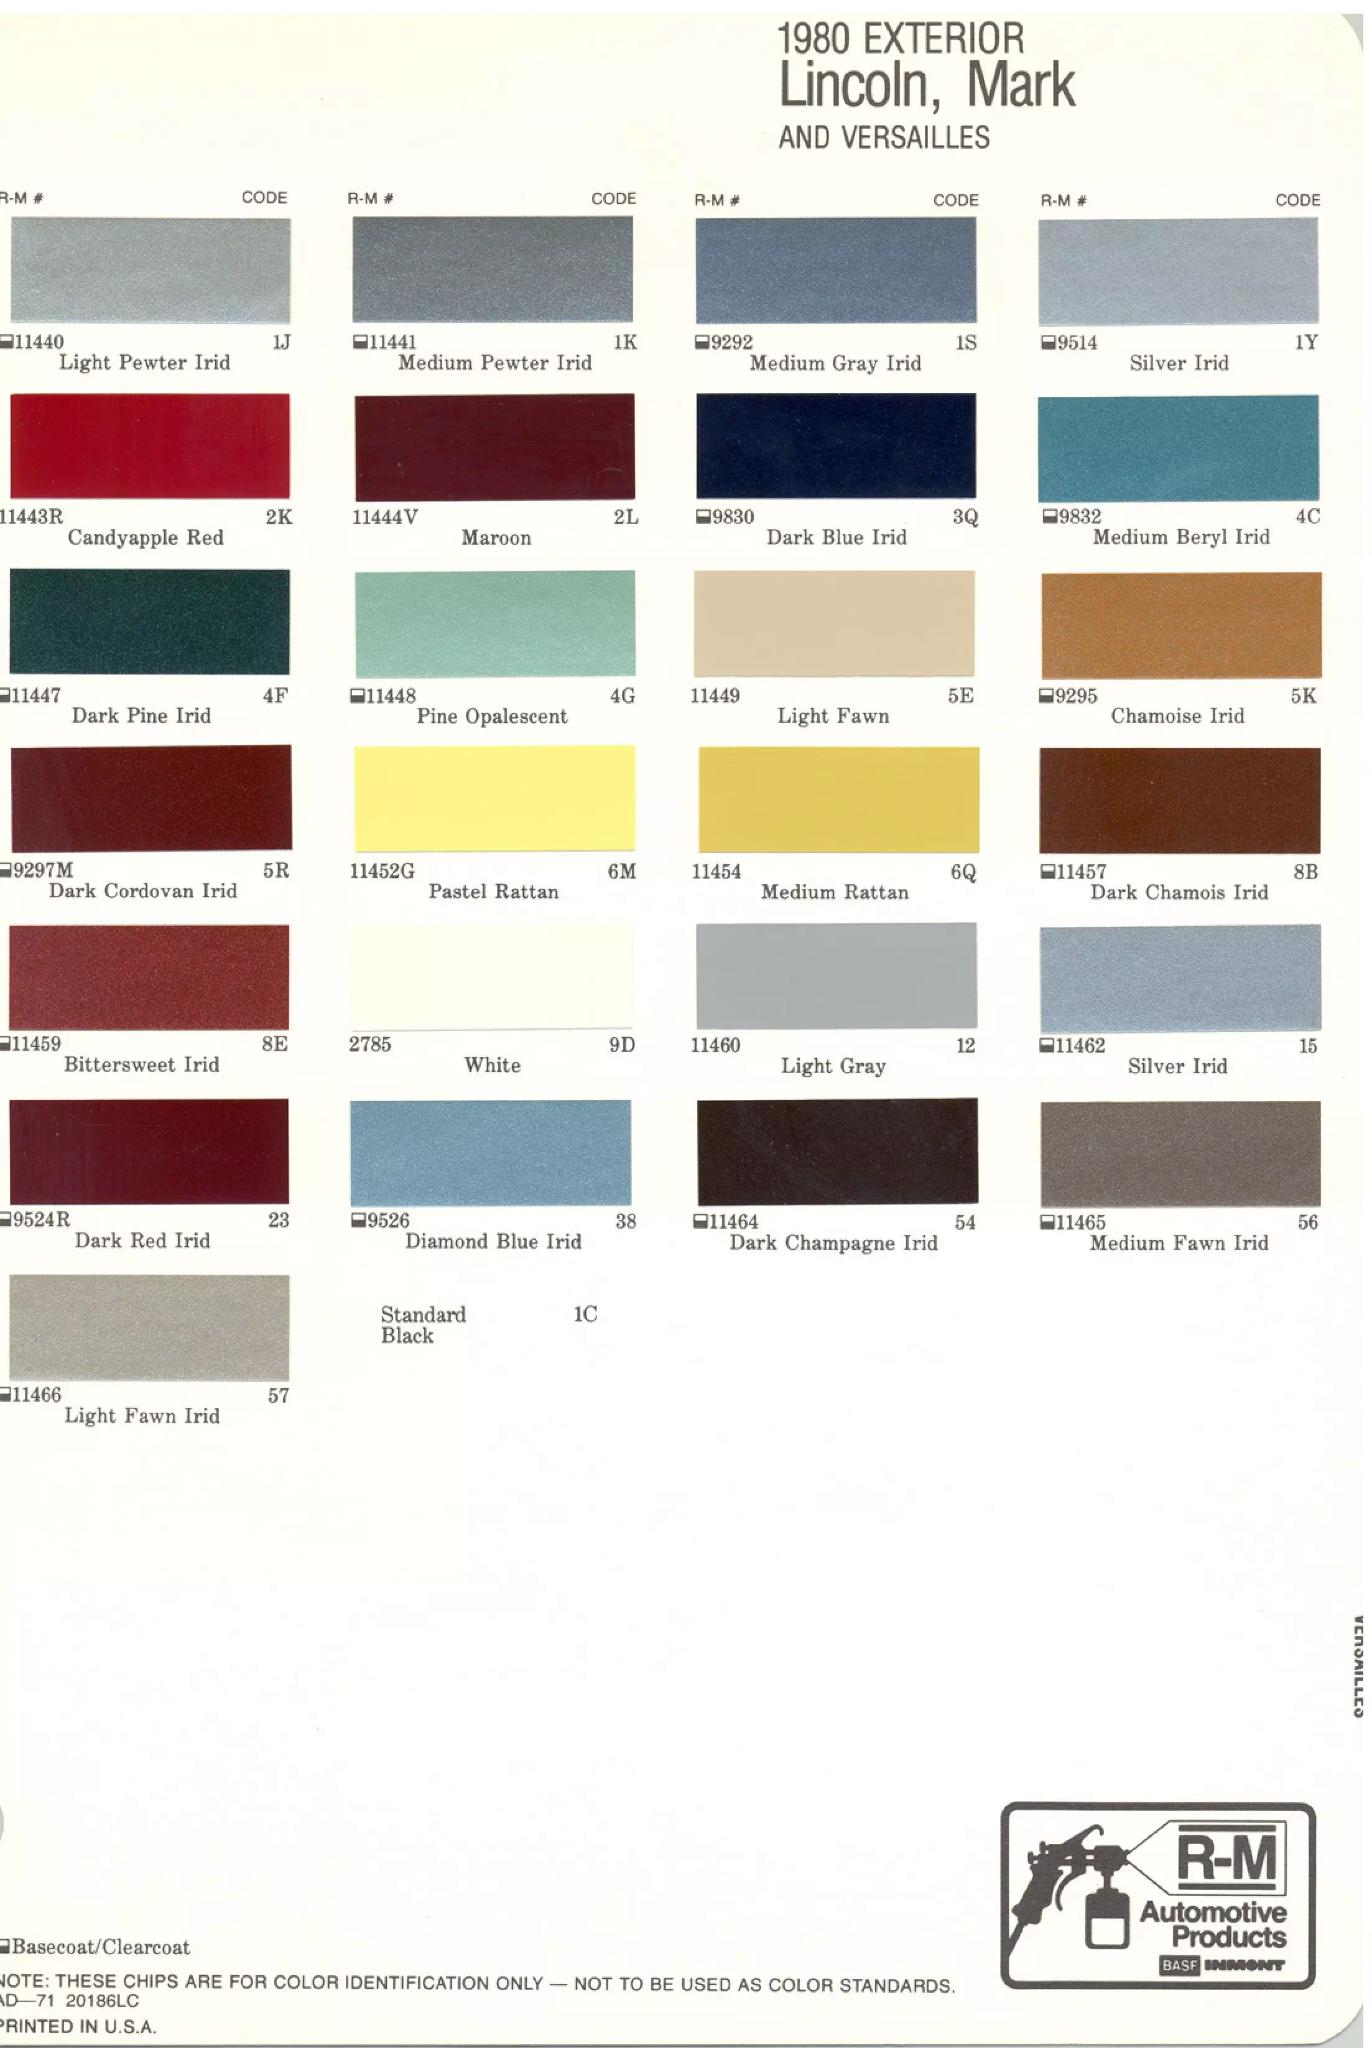 Colors used on Lincoln exterior vehicles in 1980